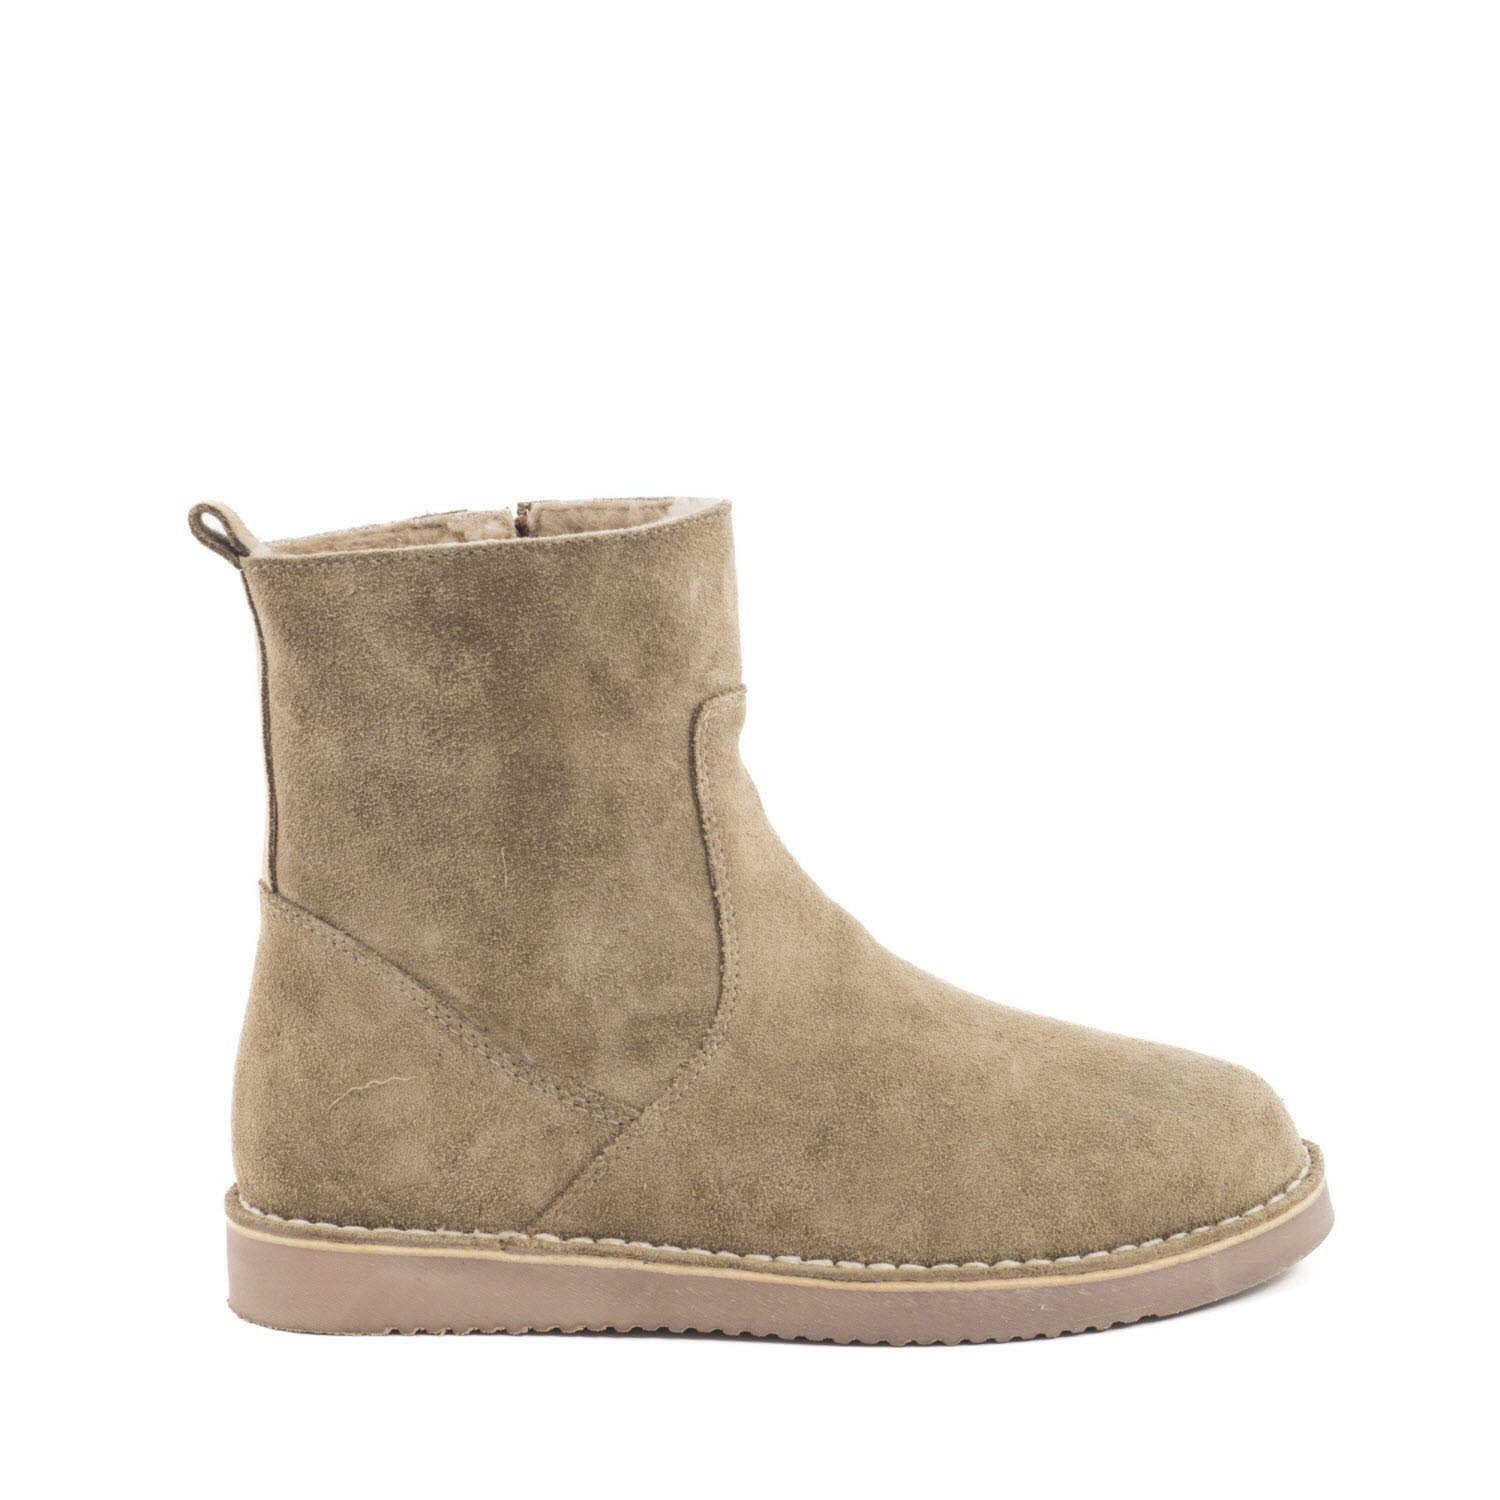 BABOUCHE Lifestyle Stiefel Sneaker